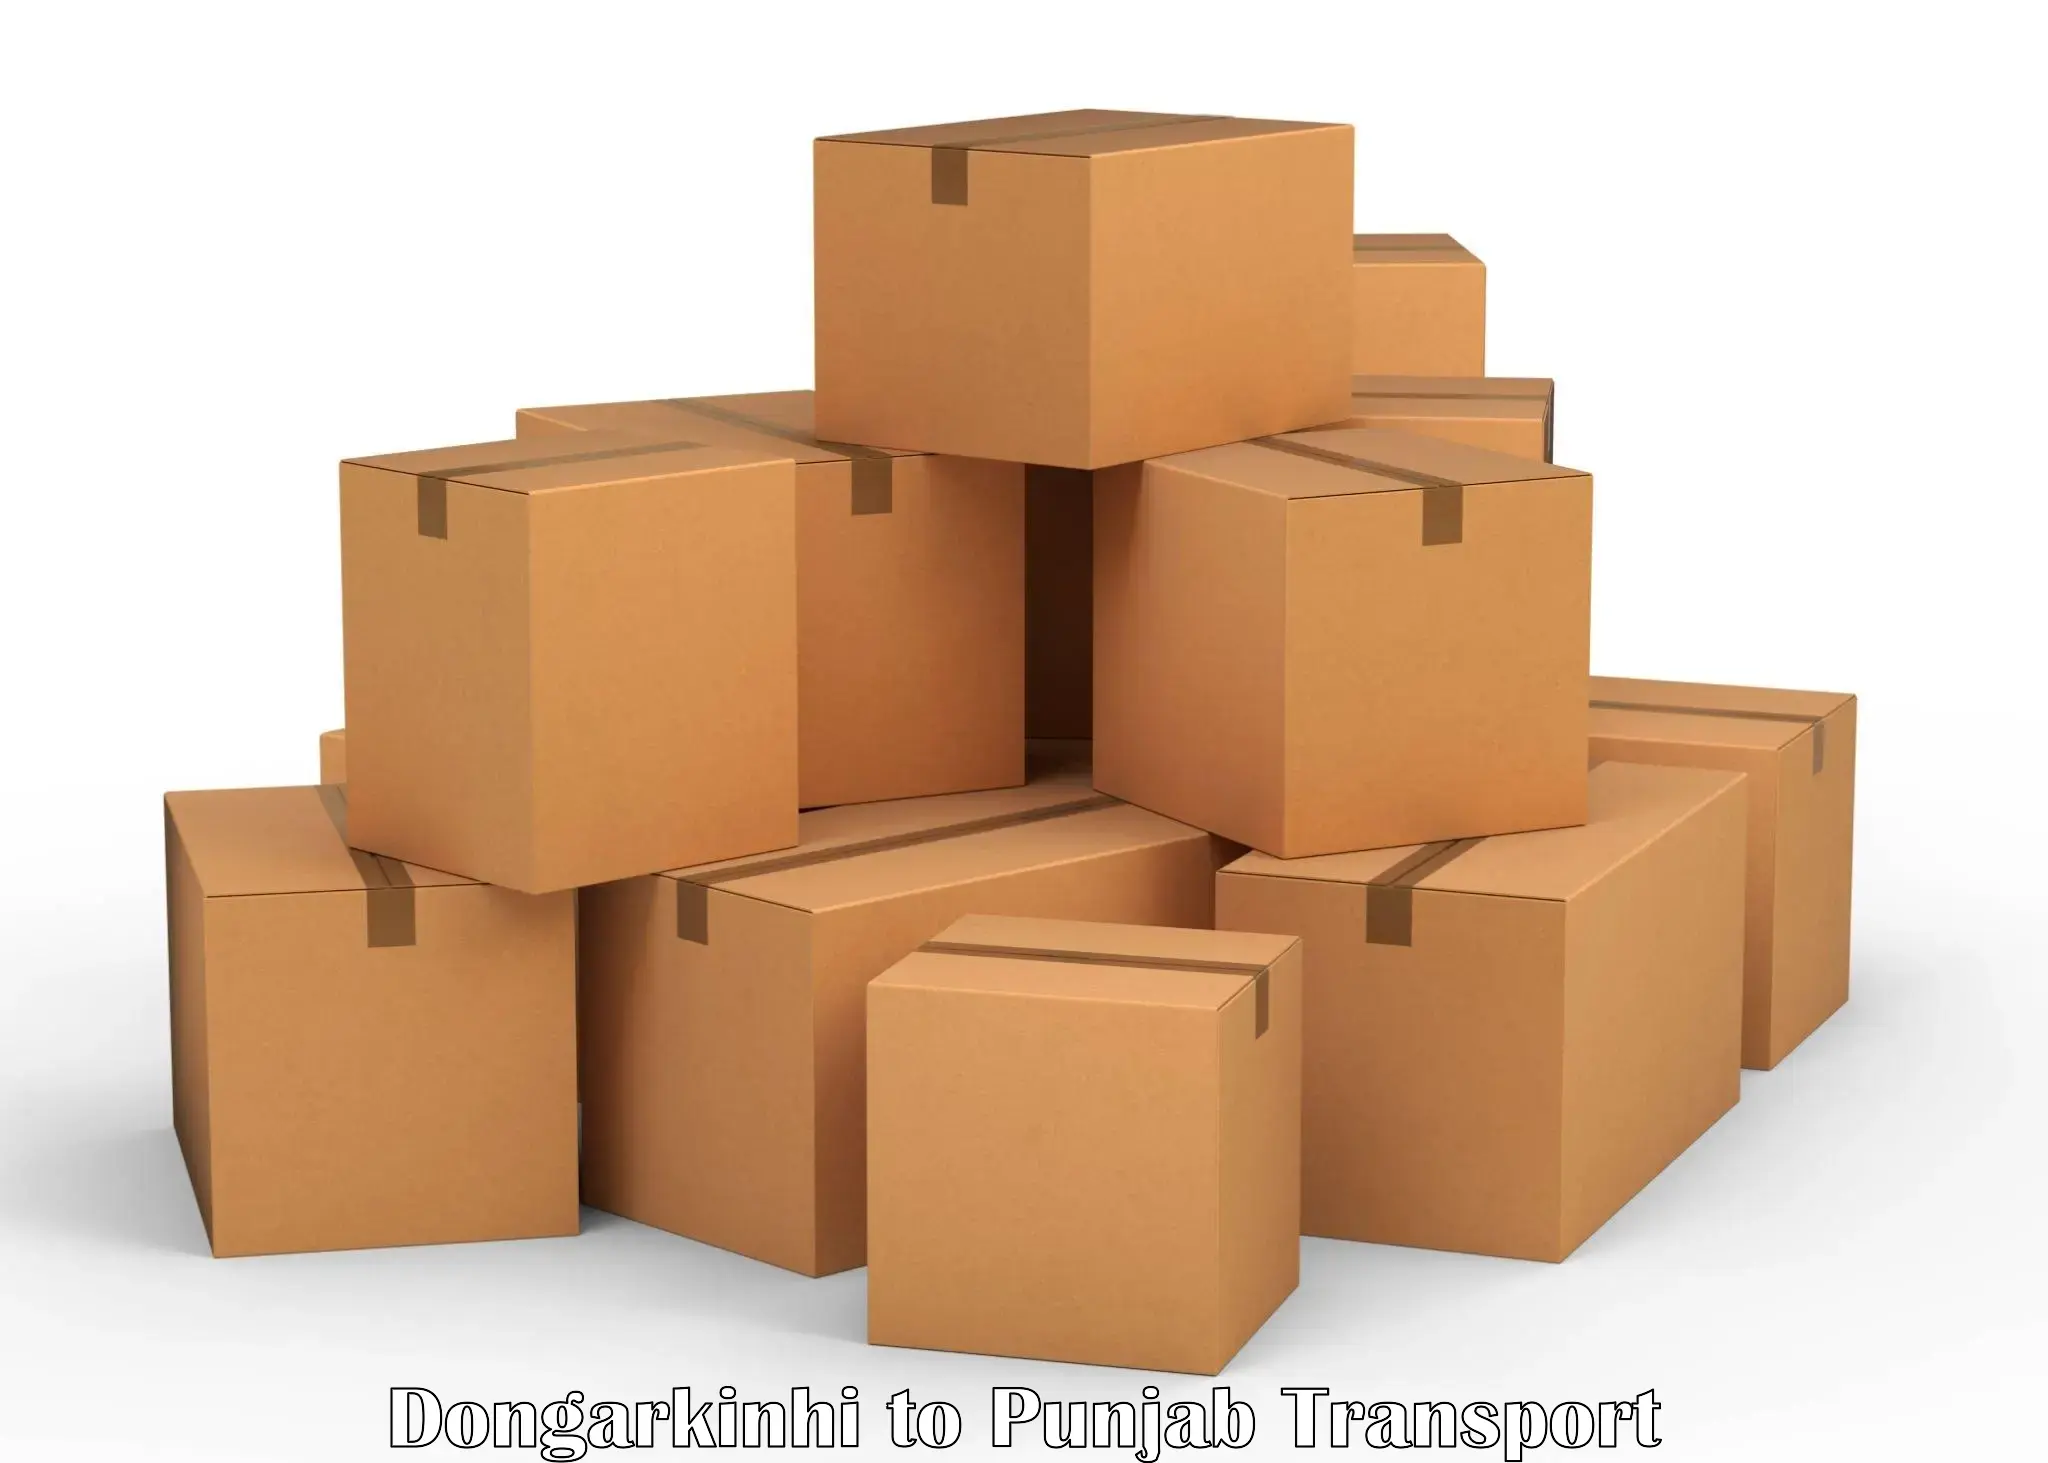 Material transport services Dongarkinhi to Ludhiana